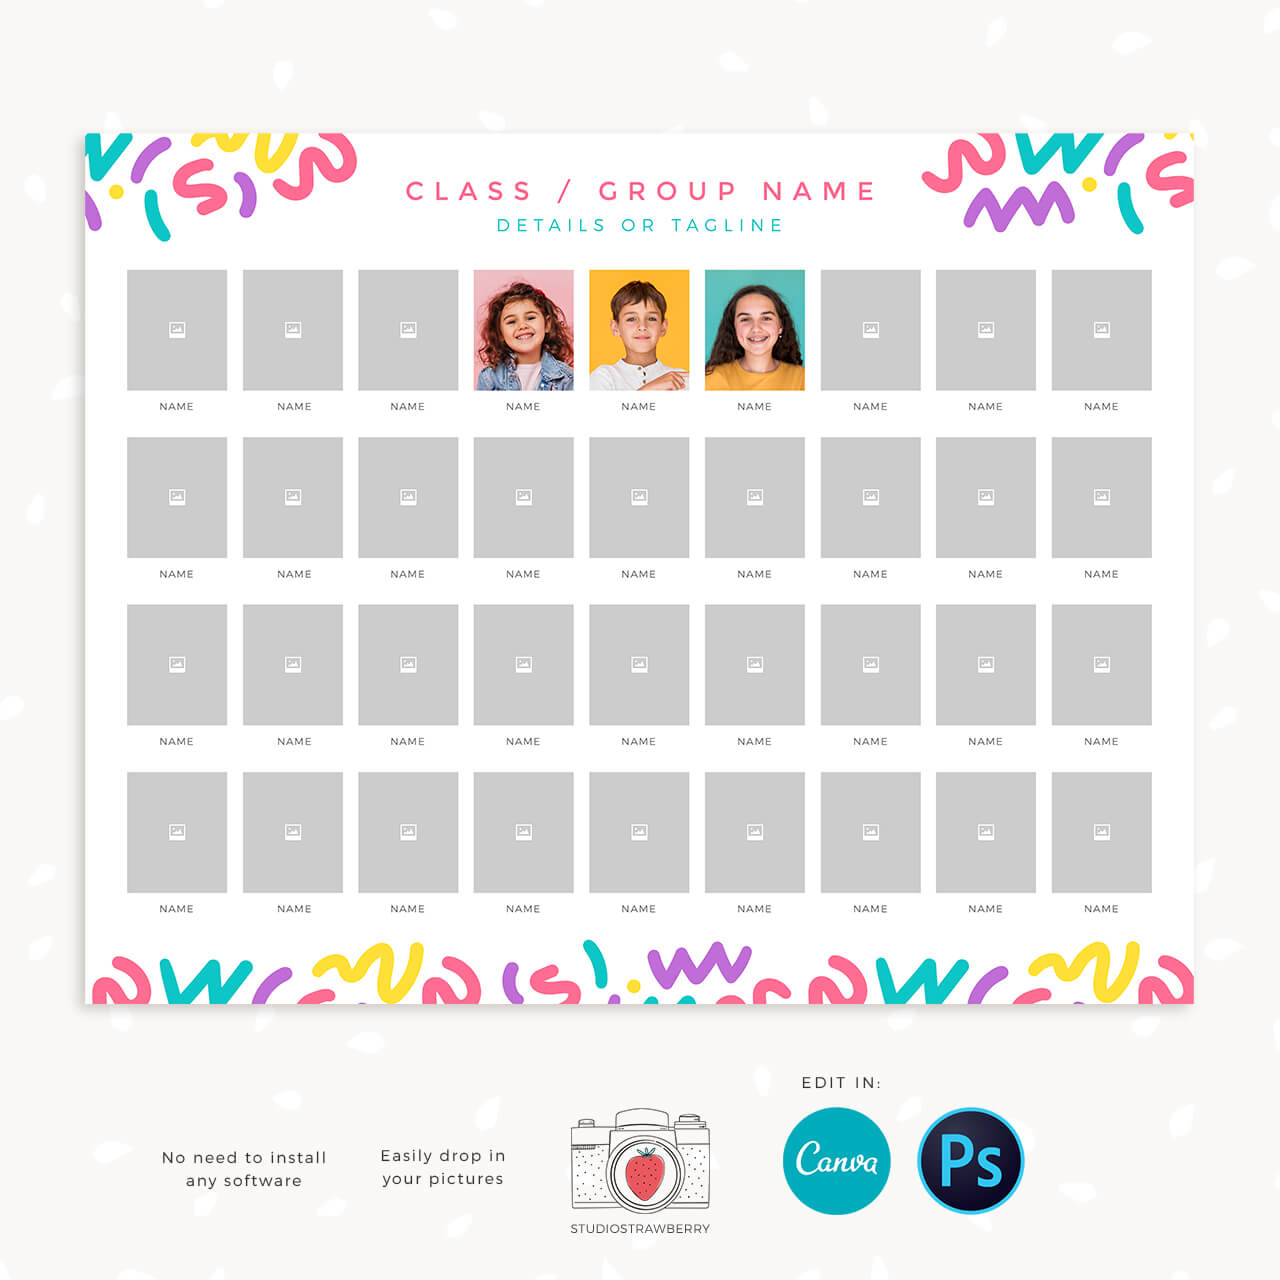 School class composite template for Canva & Photoshop – Strawberry Kit